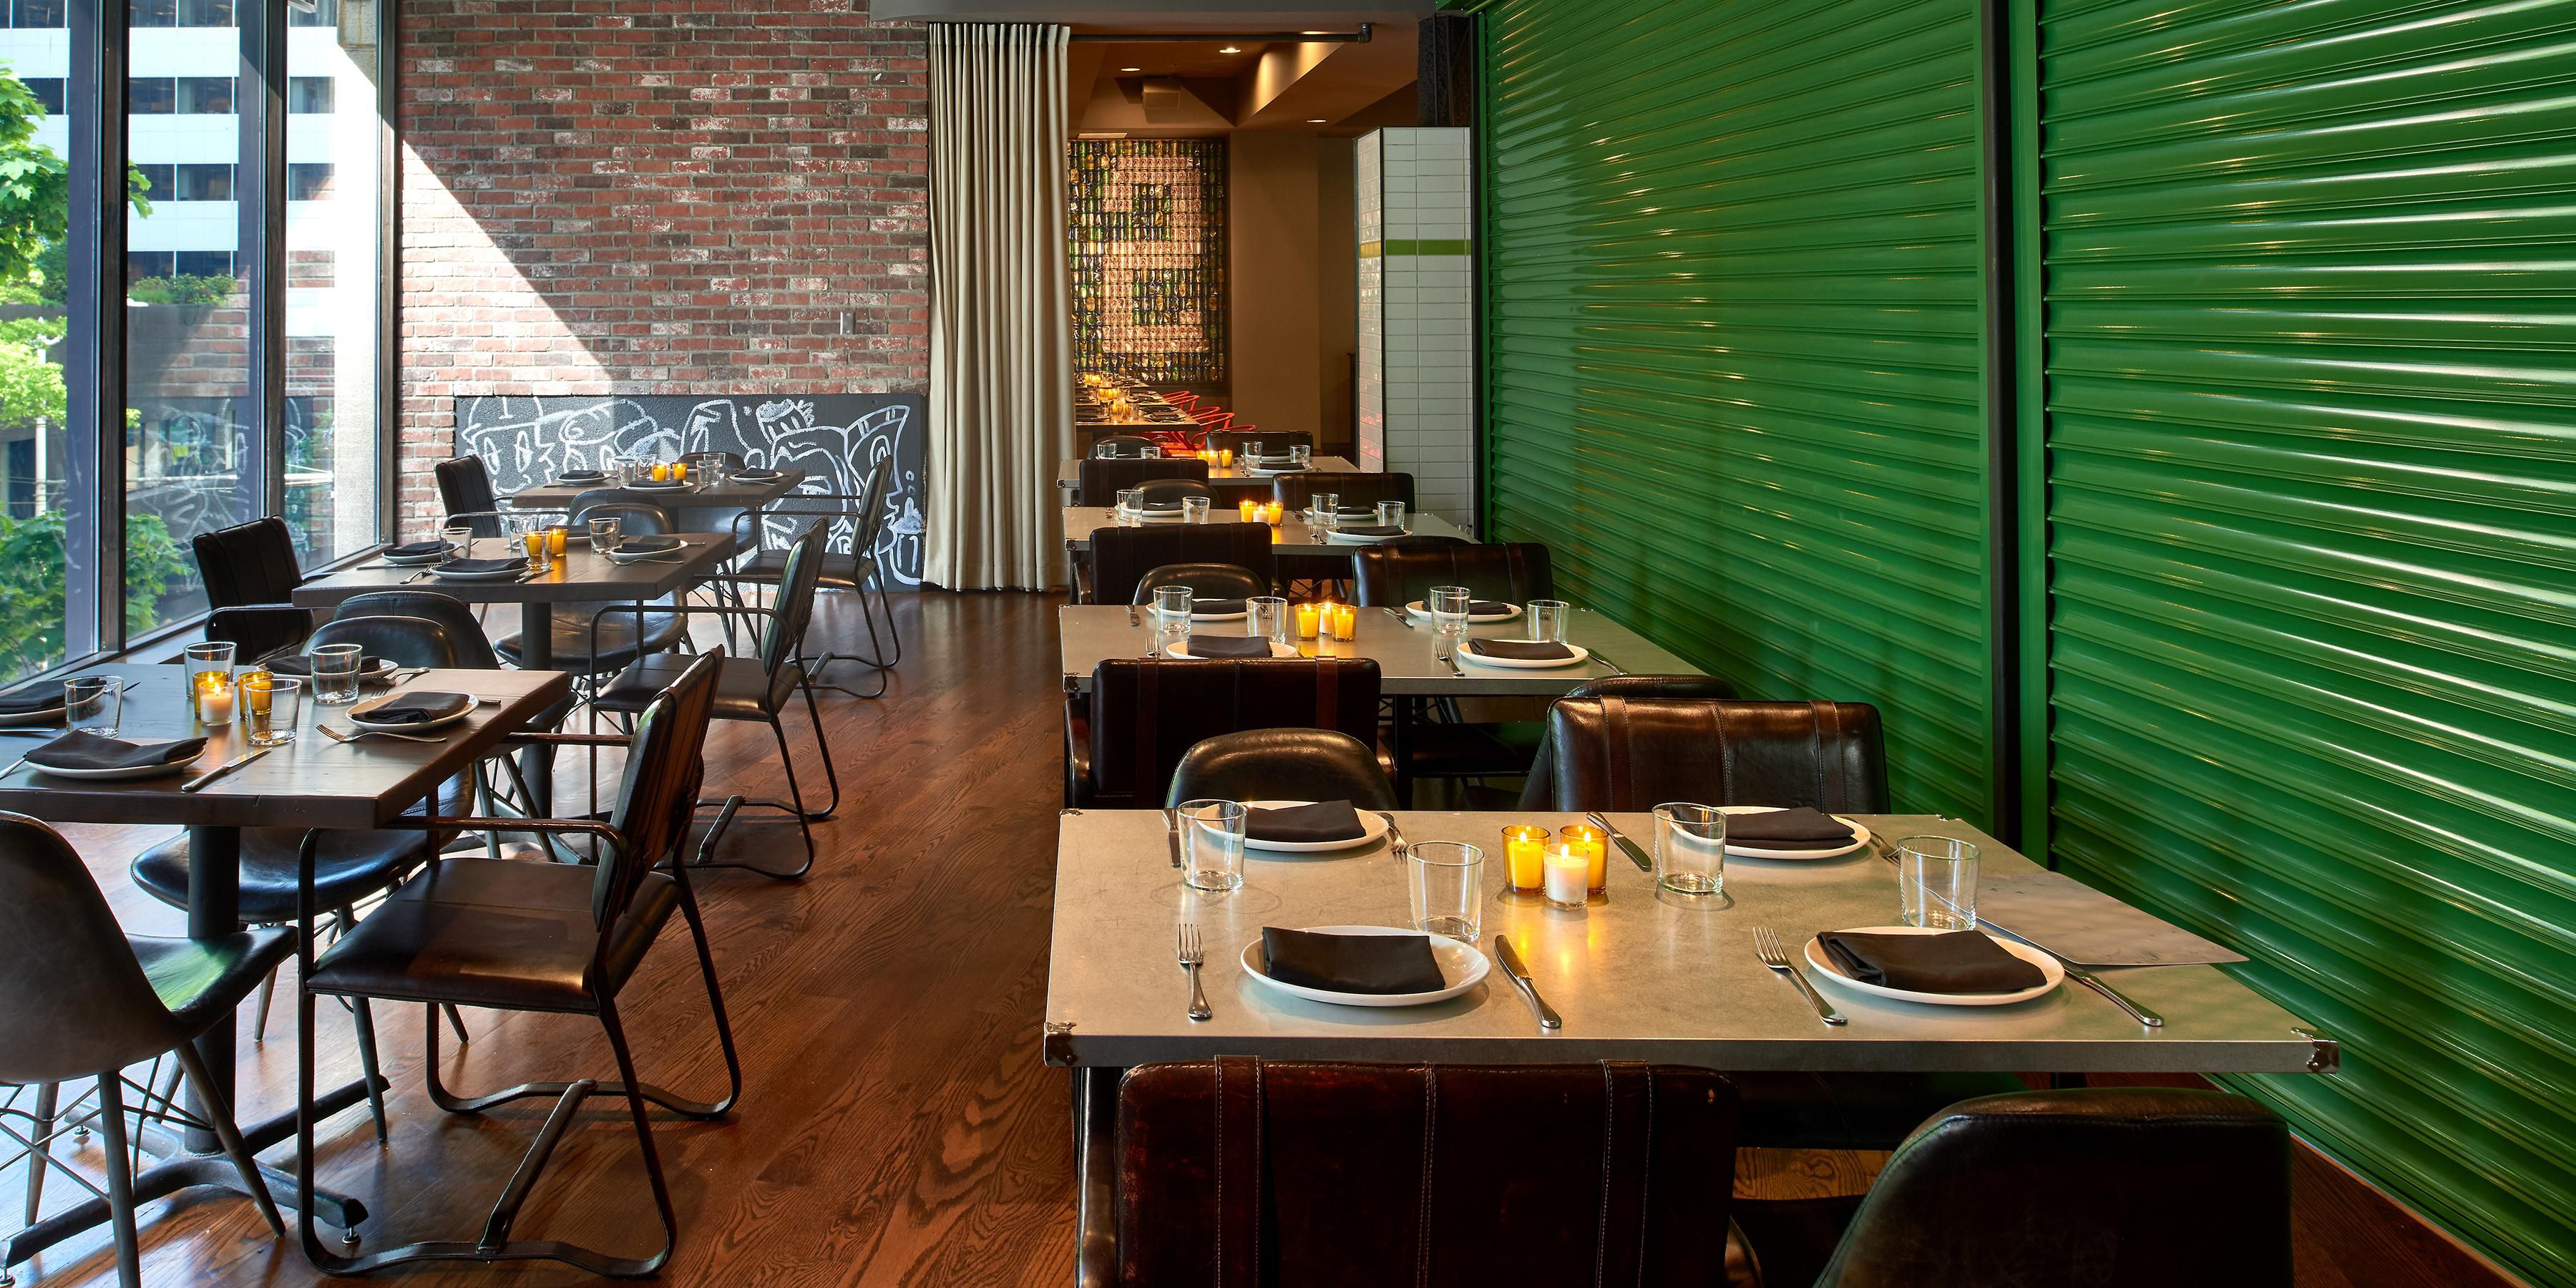 Our downtown restaurant, Outlier, features The Garage: a perfect space for your group of up to 40 guests for a seated meal or 60 of your closest friends for a reception hidden behind huge green doors. The Garage also features floor to ceiling windows with plenty of natural light.